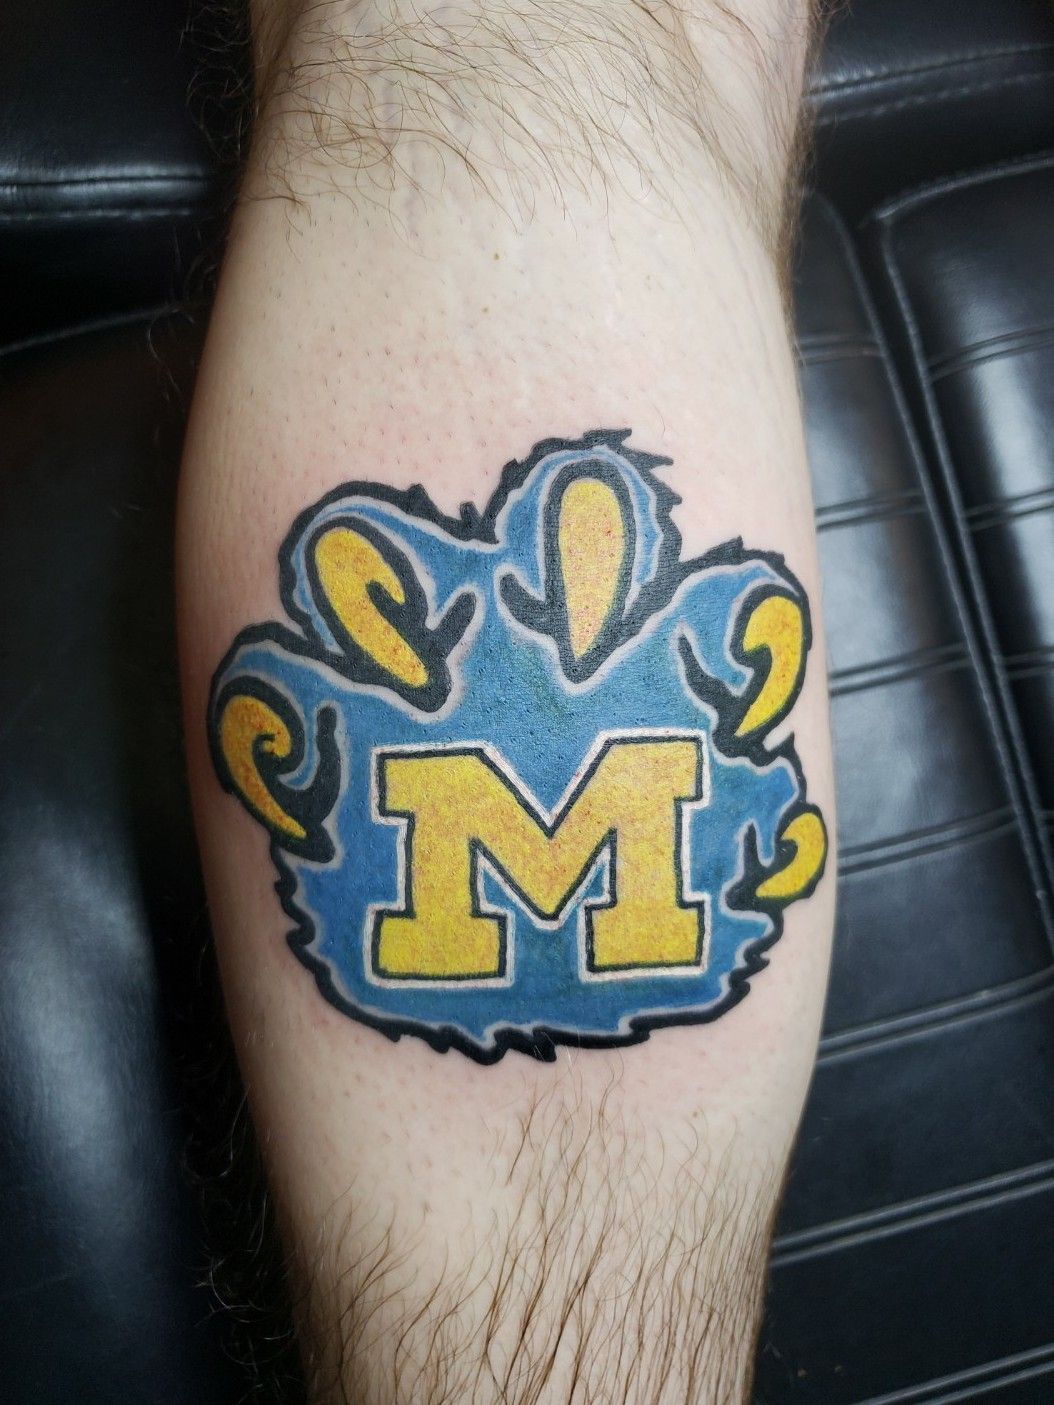 University of Michigan tattoo done by Pineapple at LuckyBambooTattoo  Michigan College UniversityofMichigan  Michigan tattoos Bamboo tattoo Wolverine  tattoo